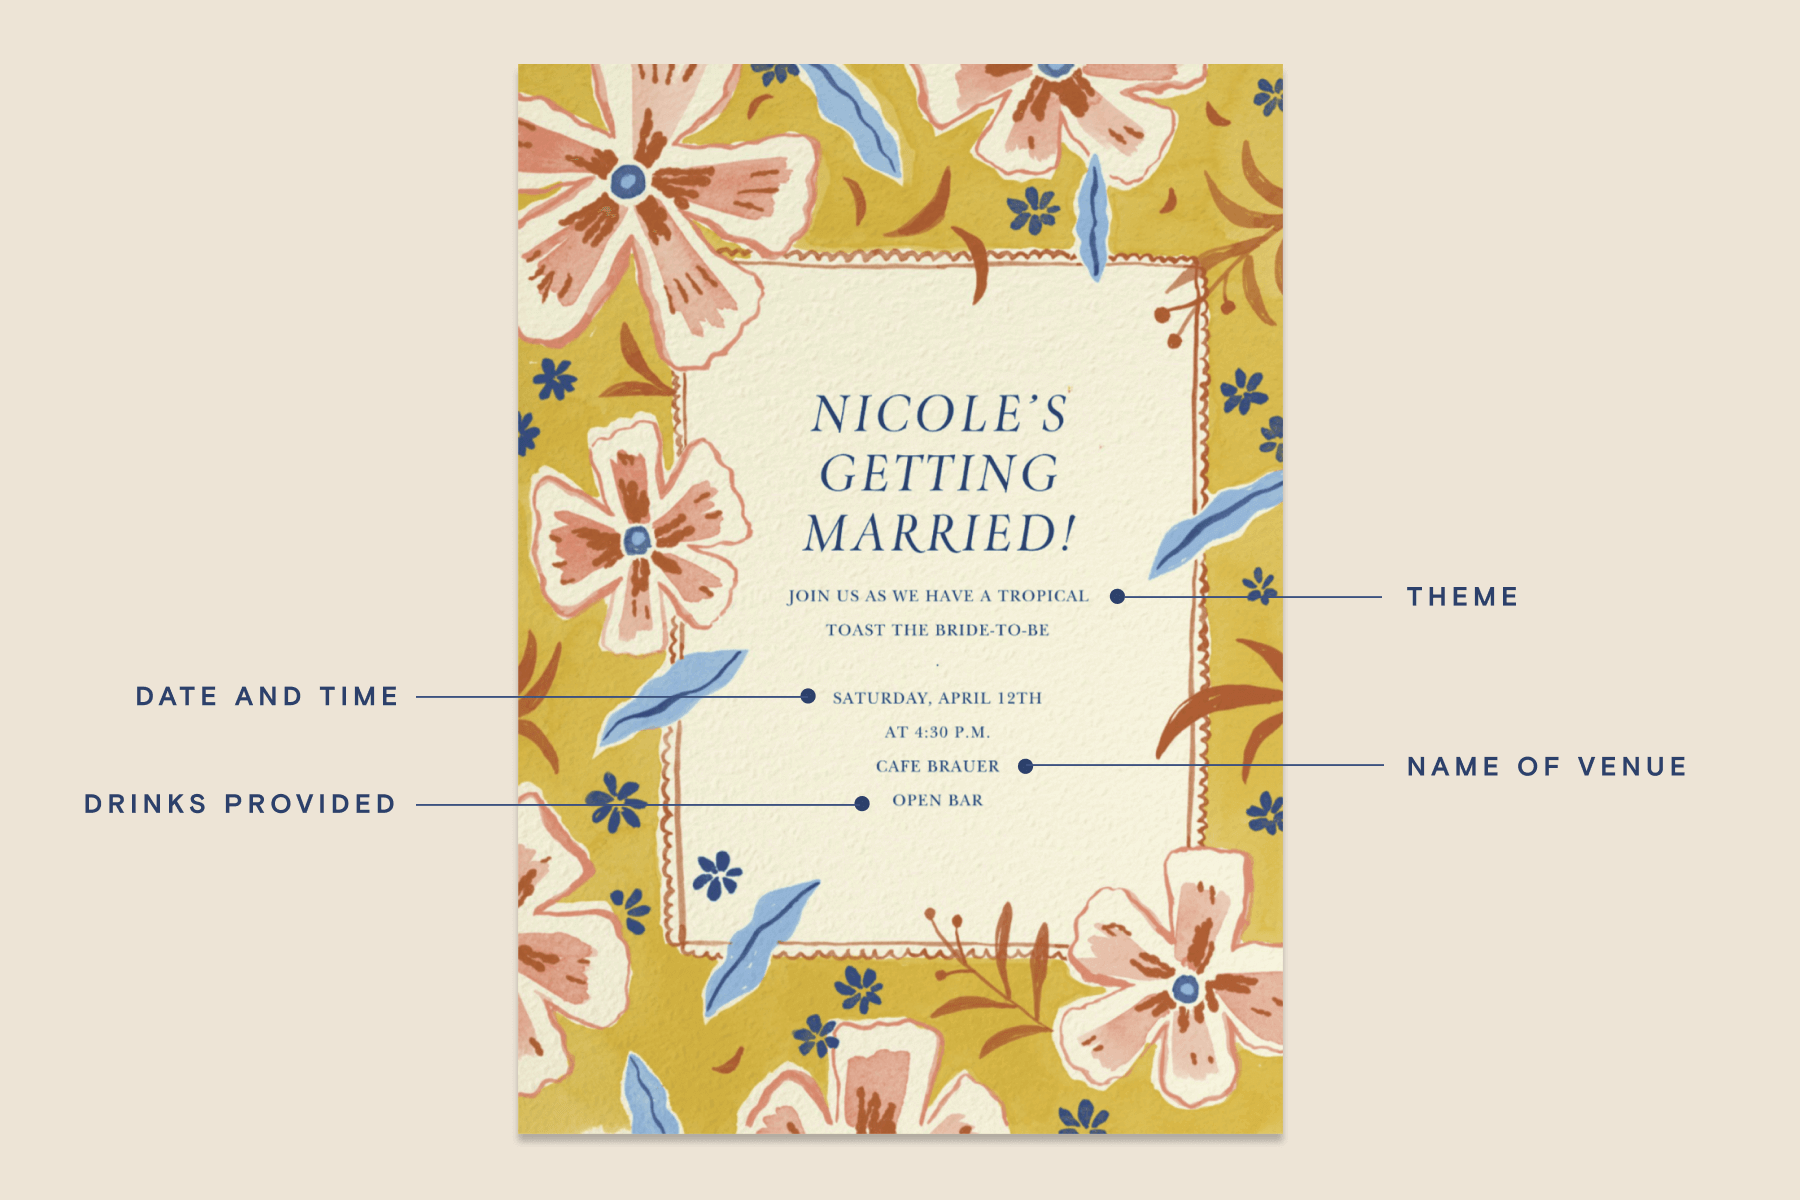 A bridal shower invitation with a chartreuse border and pink flowers and blue leaves, plus an infographic element pointing to various details on the card: Theme, date and time, venue, and whether drinks are provided.